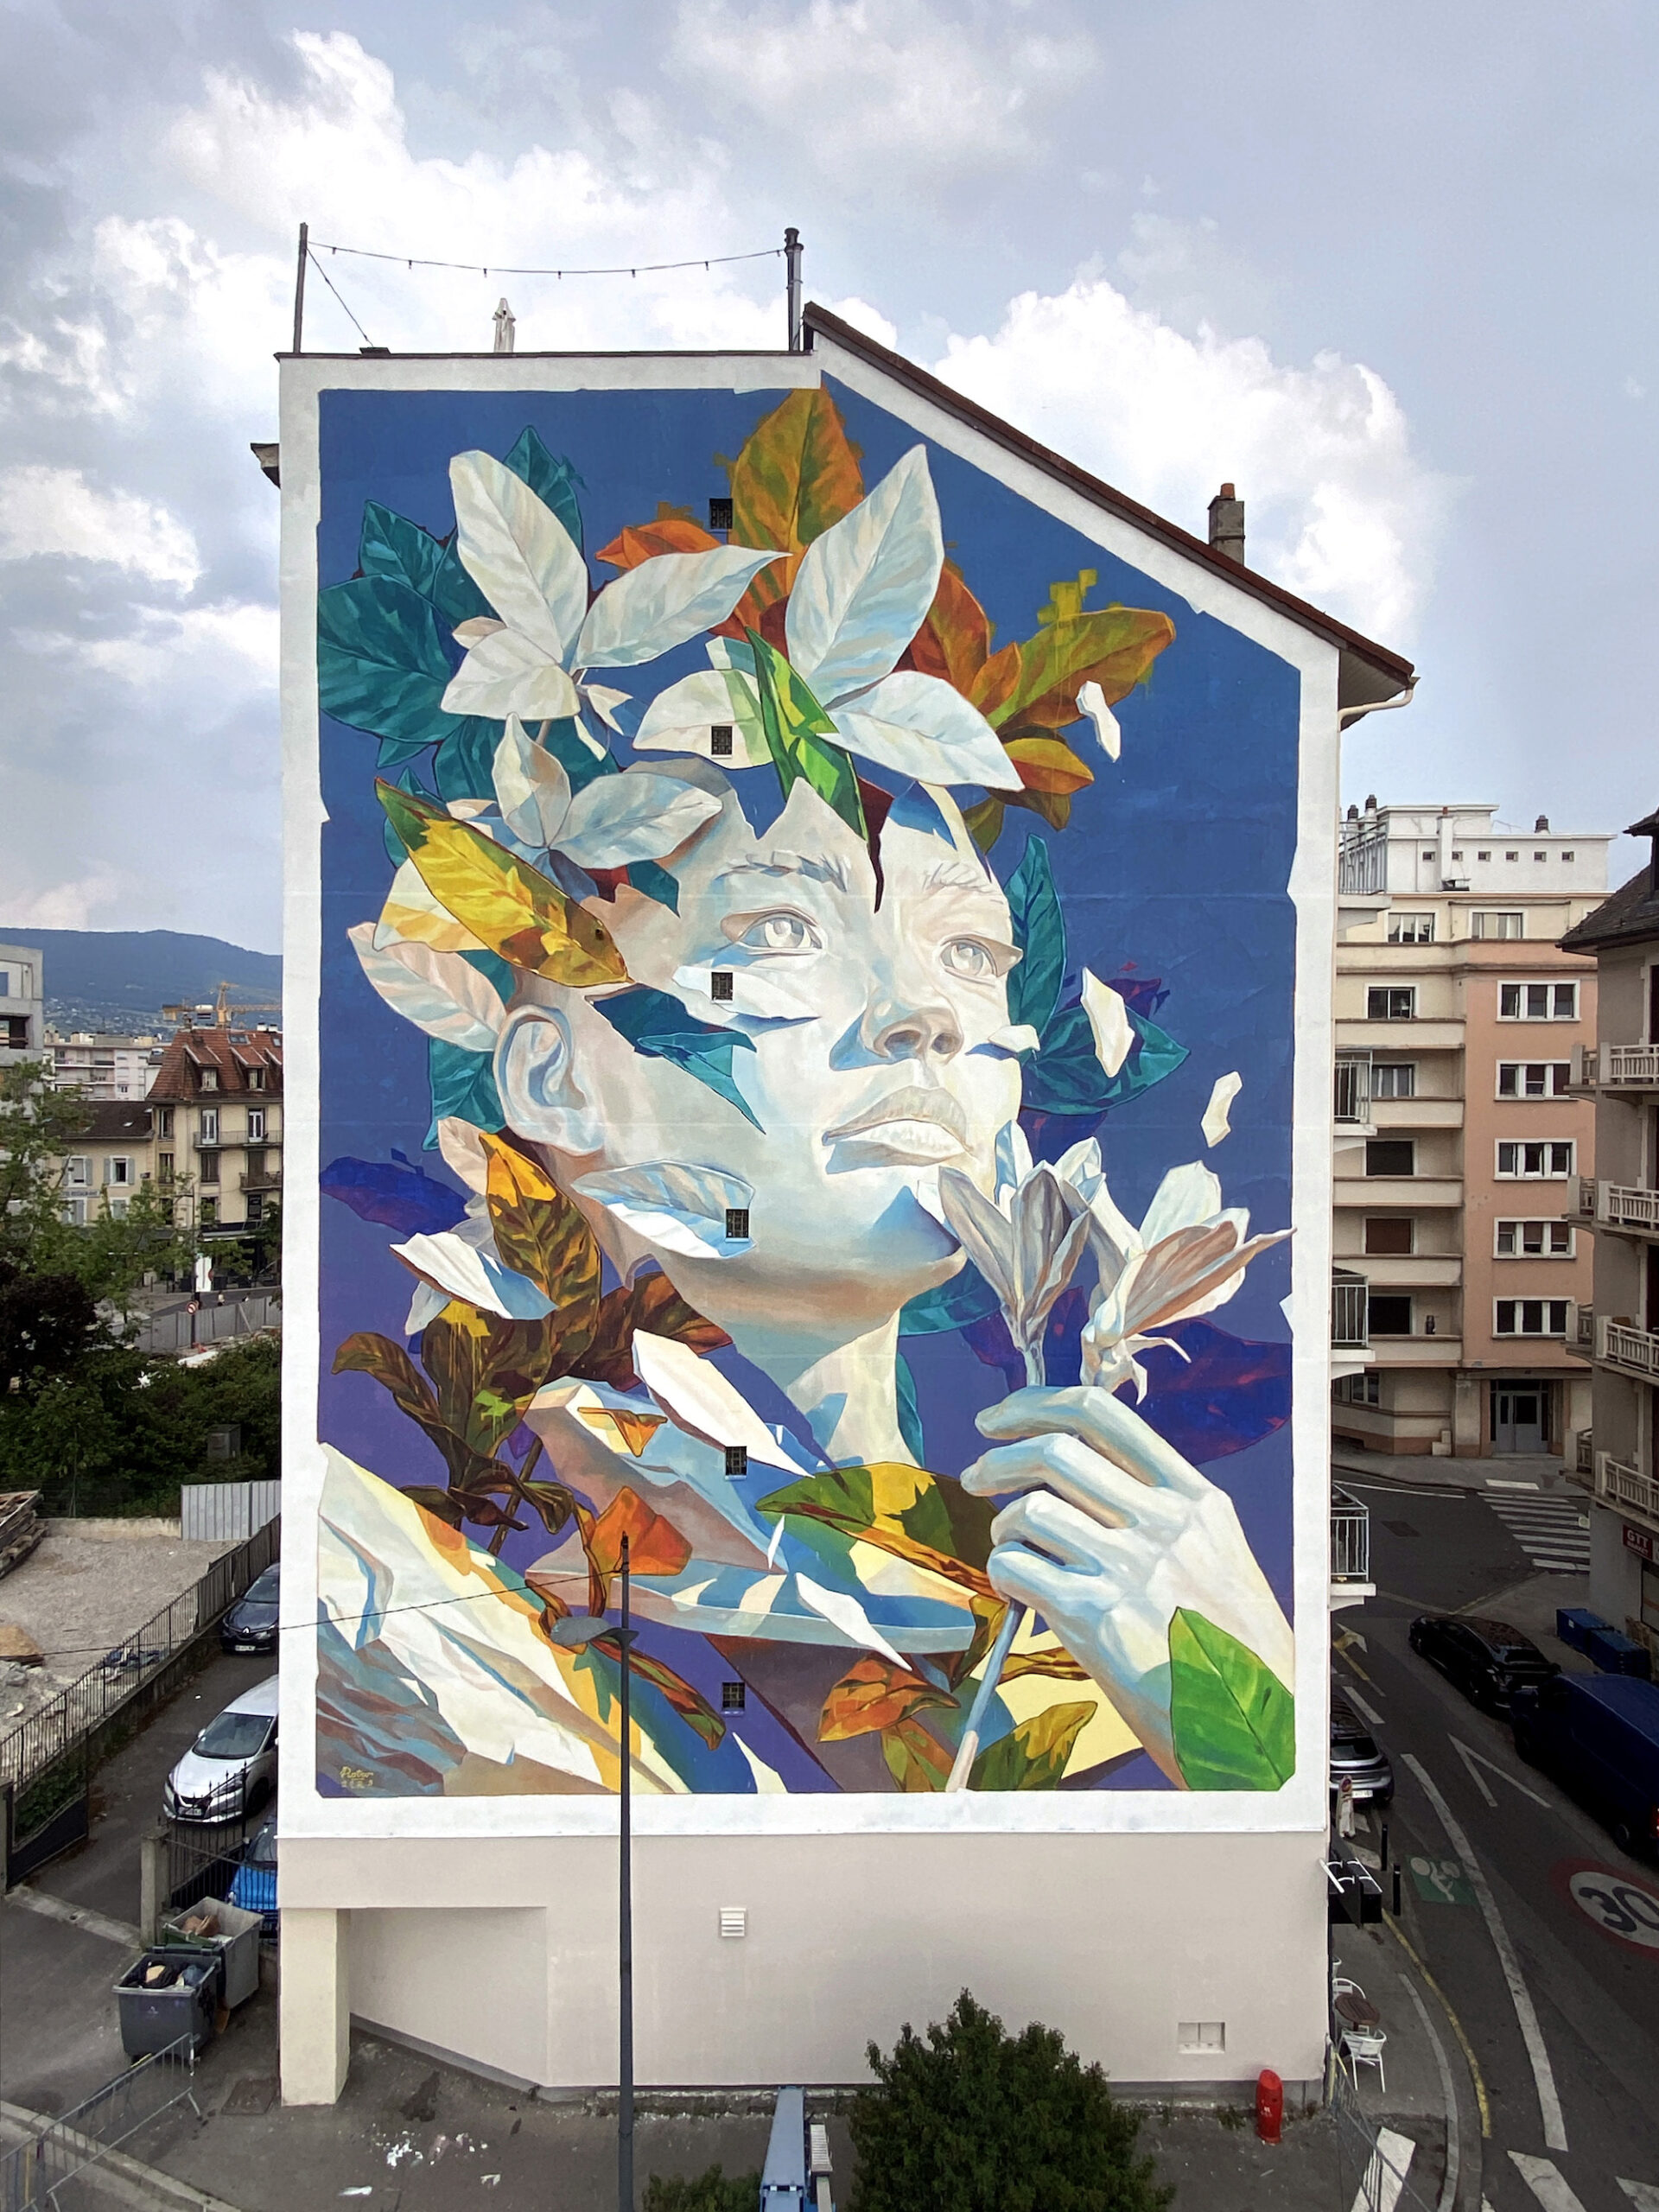 A mural of a young woman with leaves bursting from her head and shoulders.